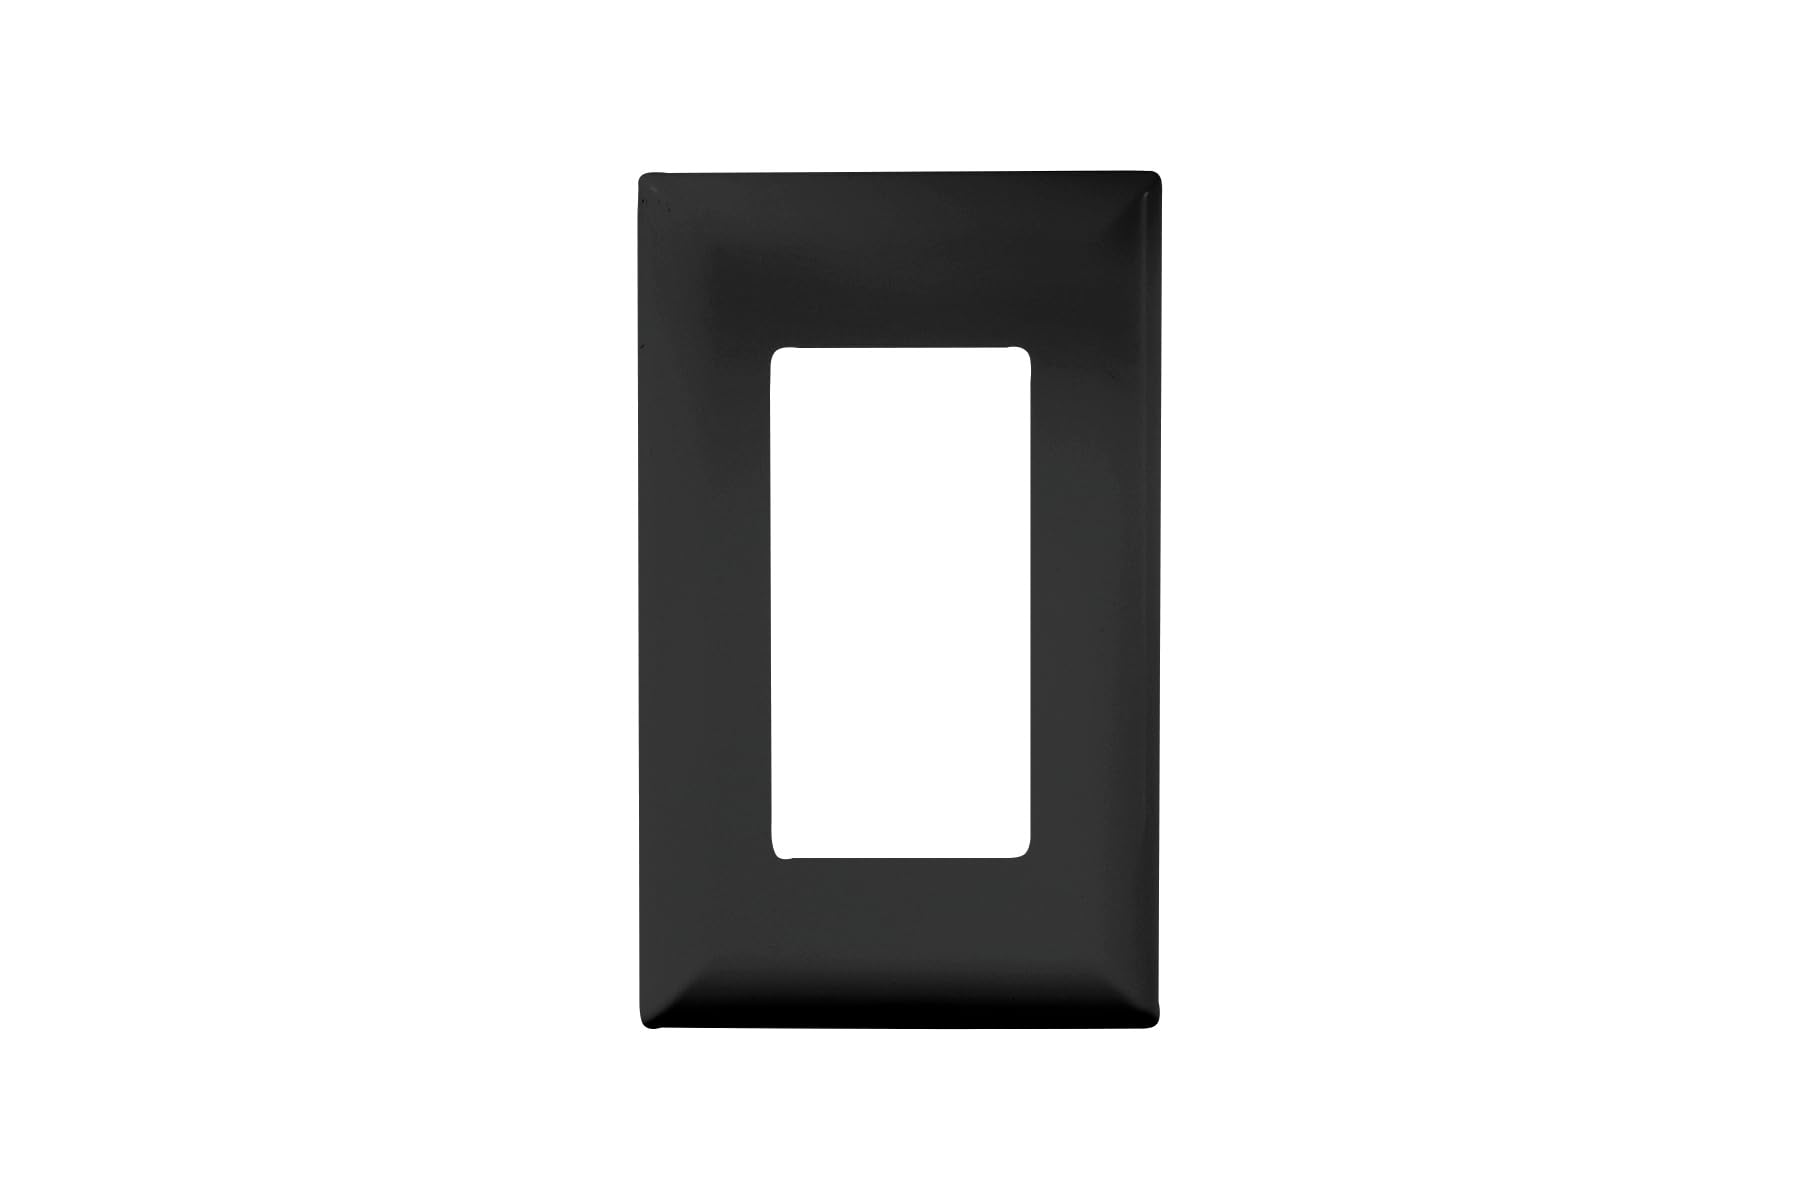 BLACK COVERPLATE FOR SELF CONTAINED CONTEMPORARY SWITCH